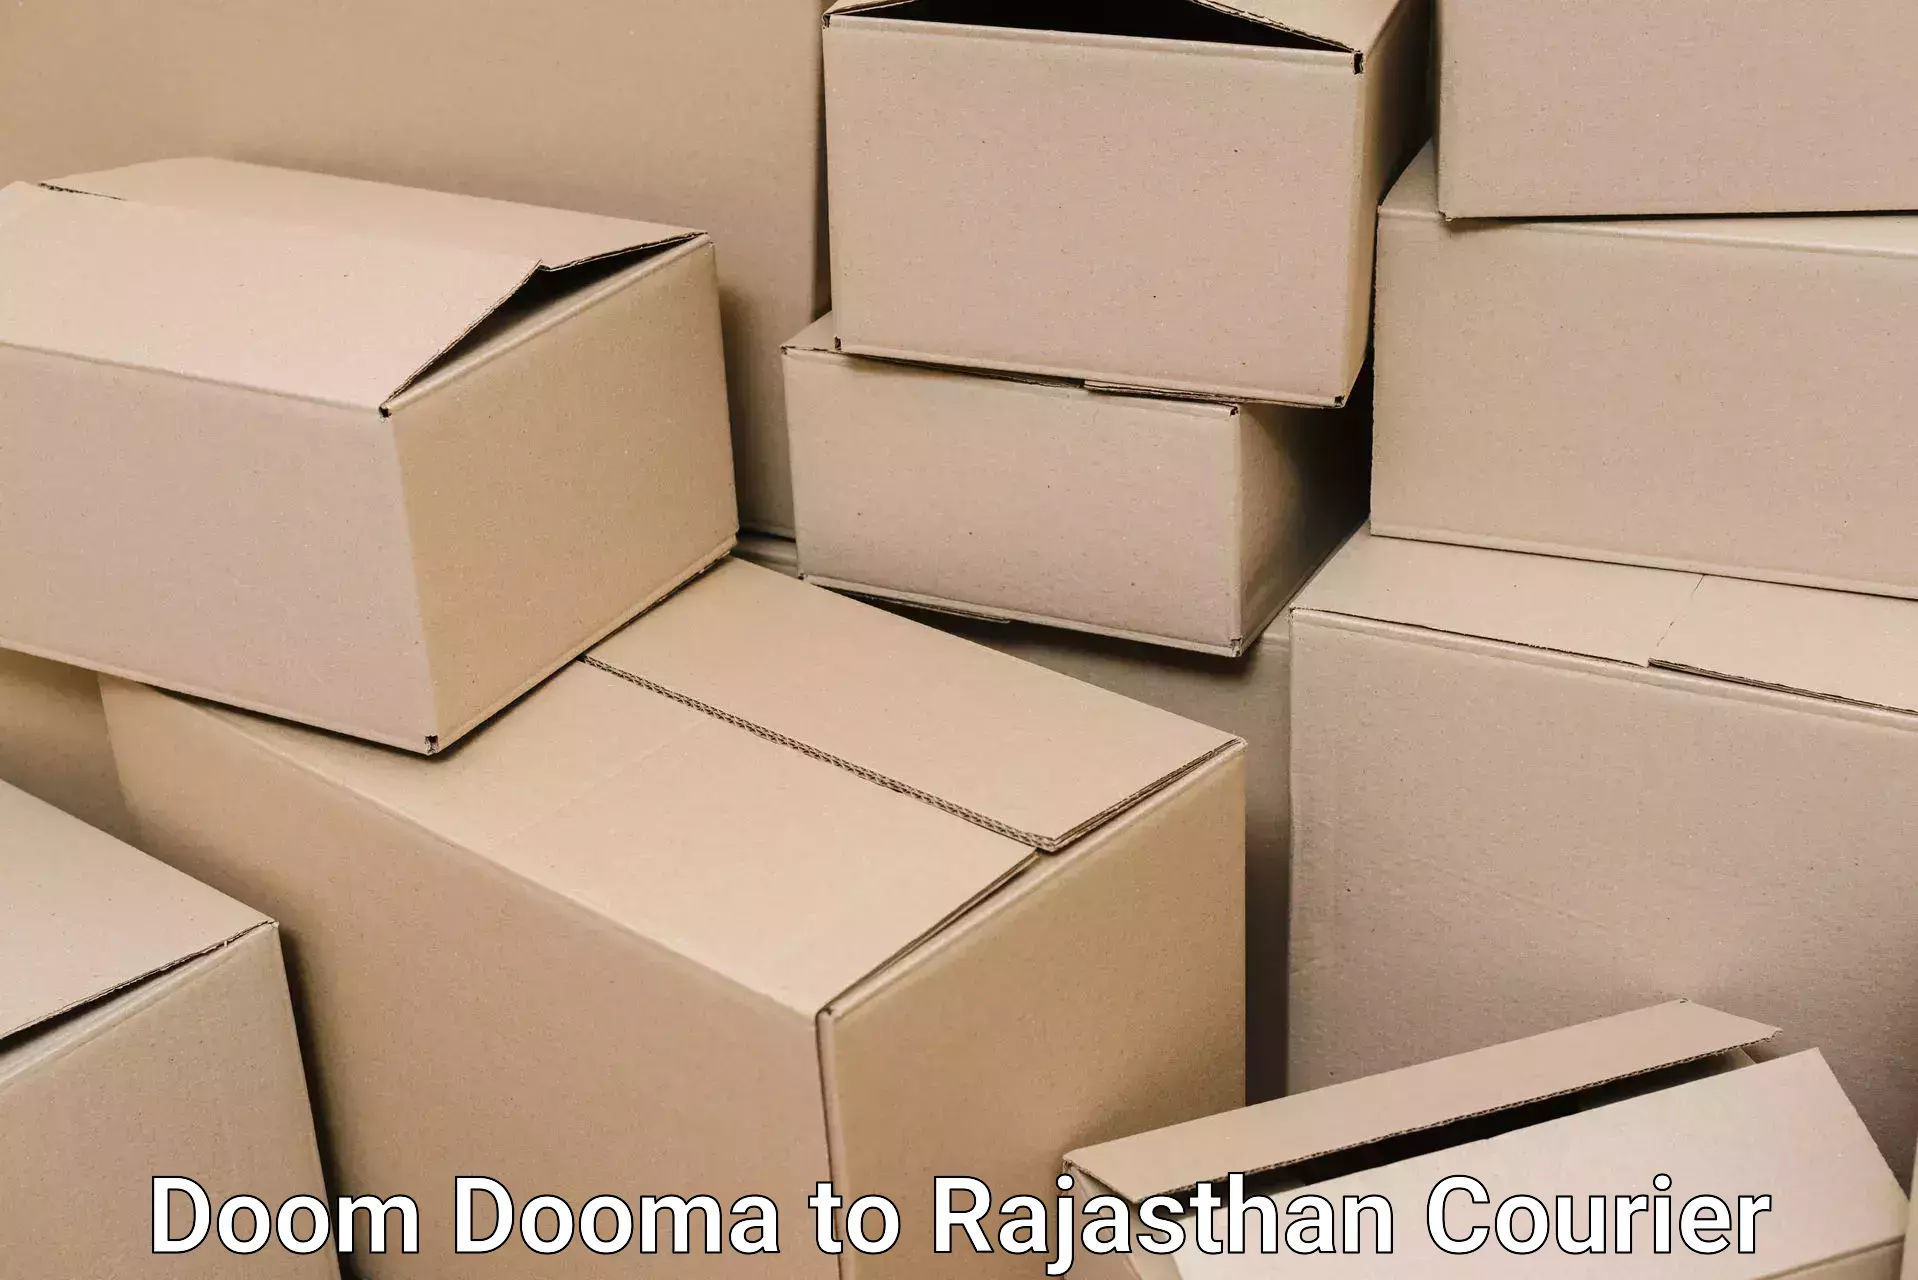 Home moving experts Doom Dooma to Piparcity